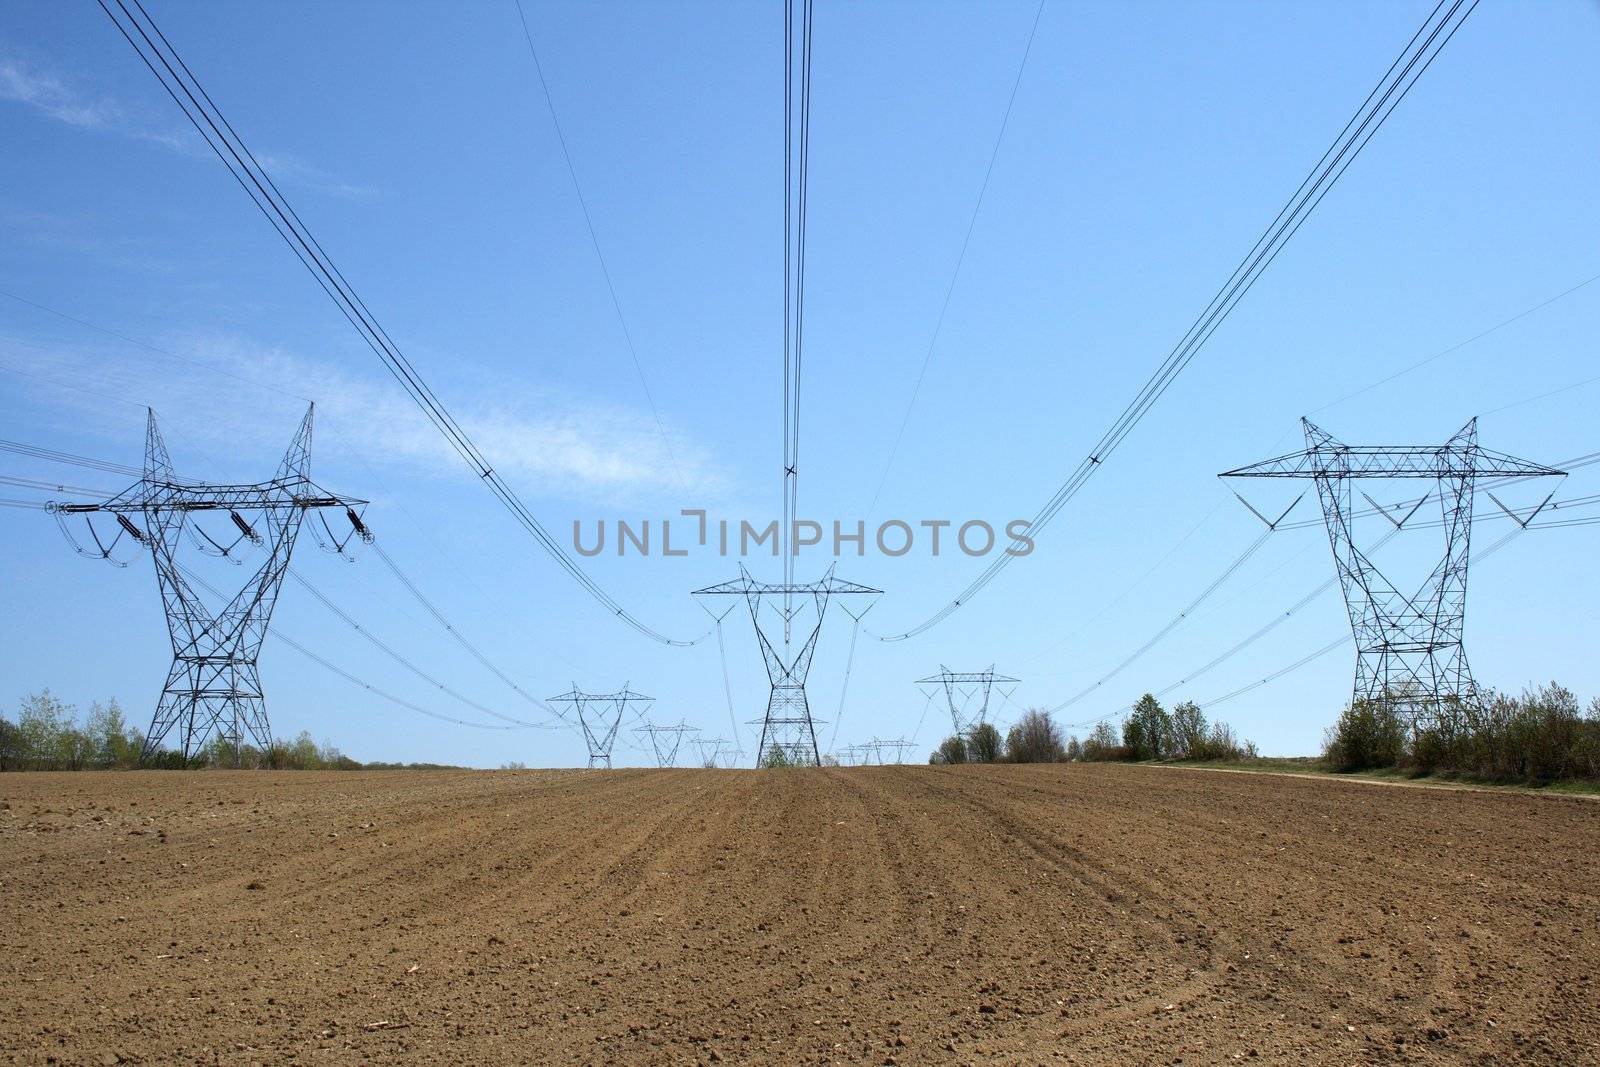 Electricity pylons in cultivated land by anikasalsera